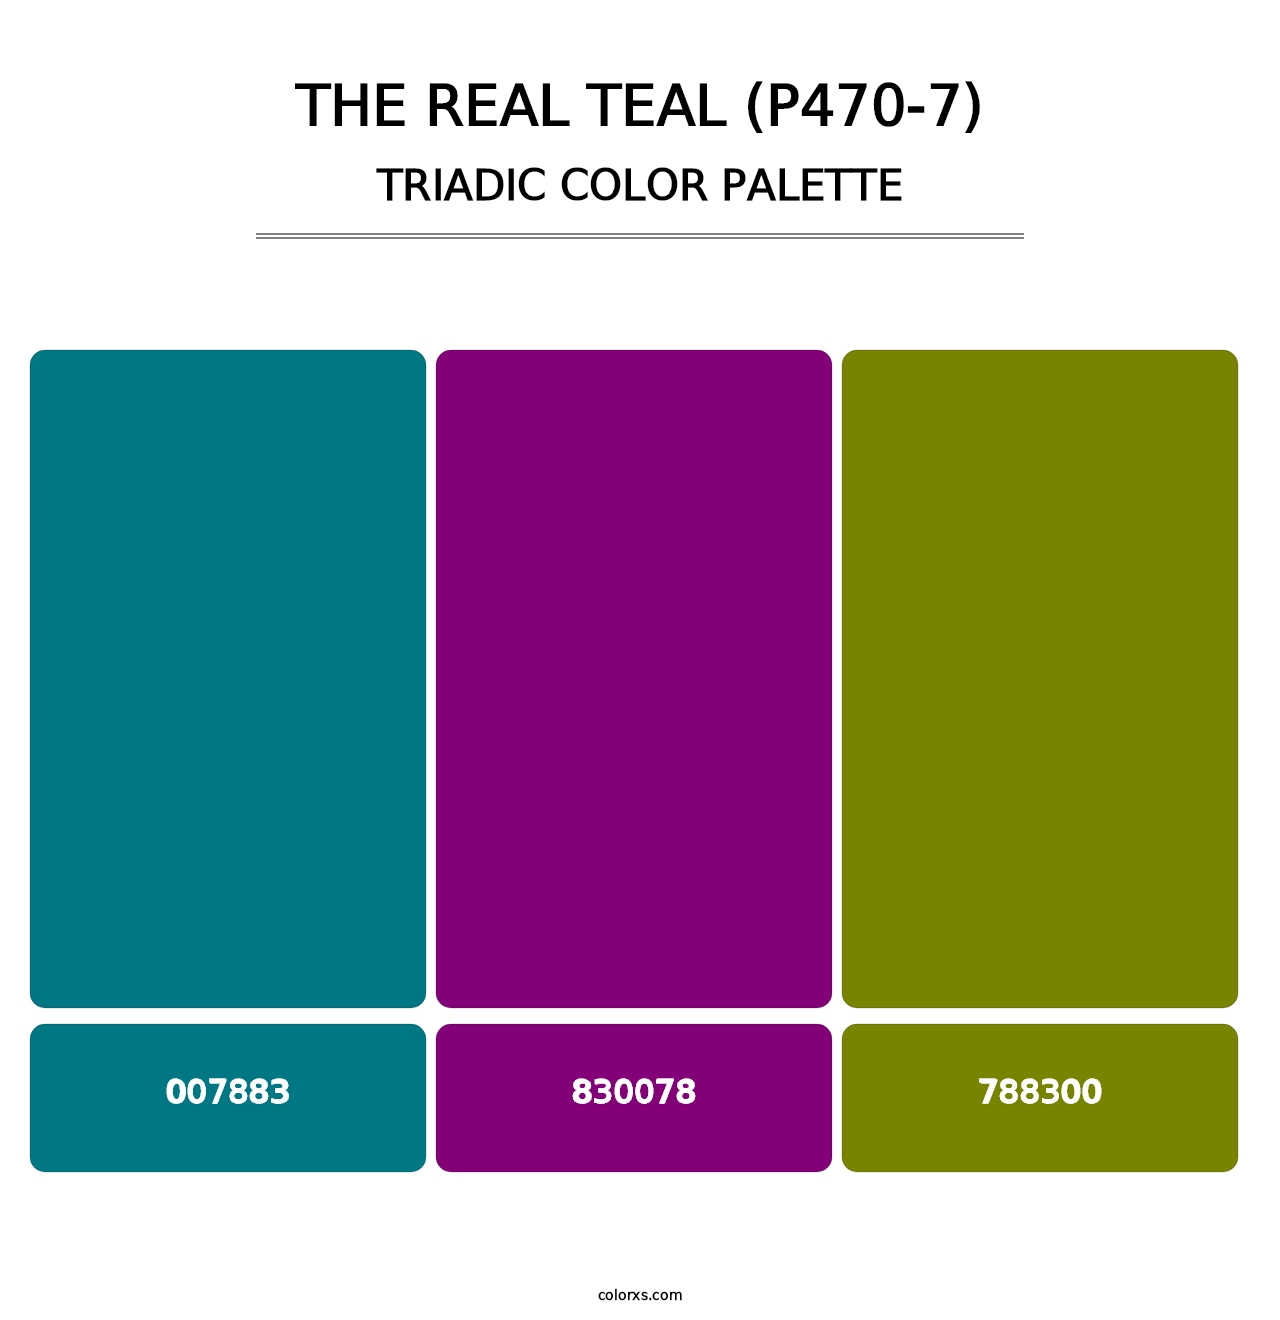 The Real Teal (P470-7) - Triadic Color Palette